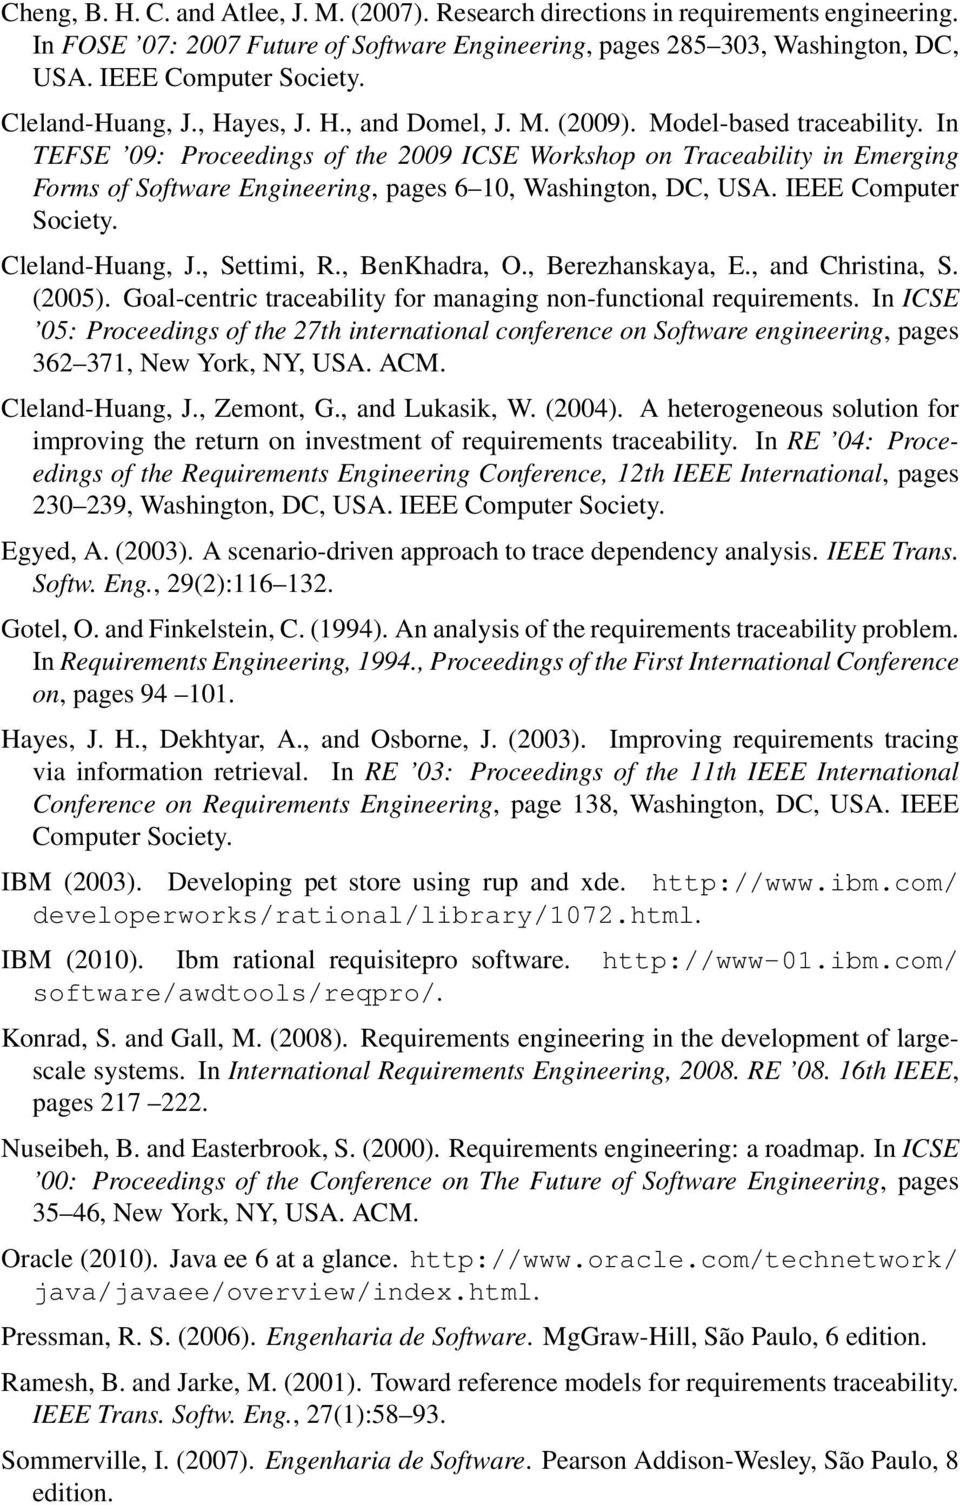 In TEFSE 09: Proceedings of the 2009 ICSE Workshop on Traceability in Emerging Forms of Software Engineering, pages 6 10, Washington, DC, USA. IEEE Computer Society. Cleland-Huang, J., Settimi, R.